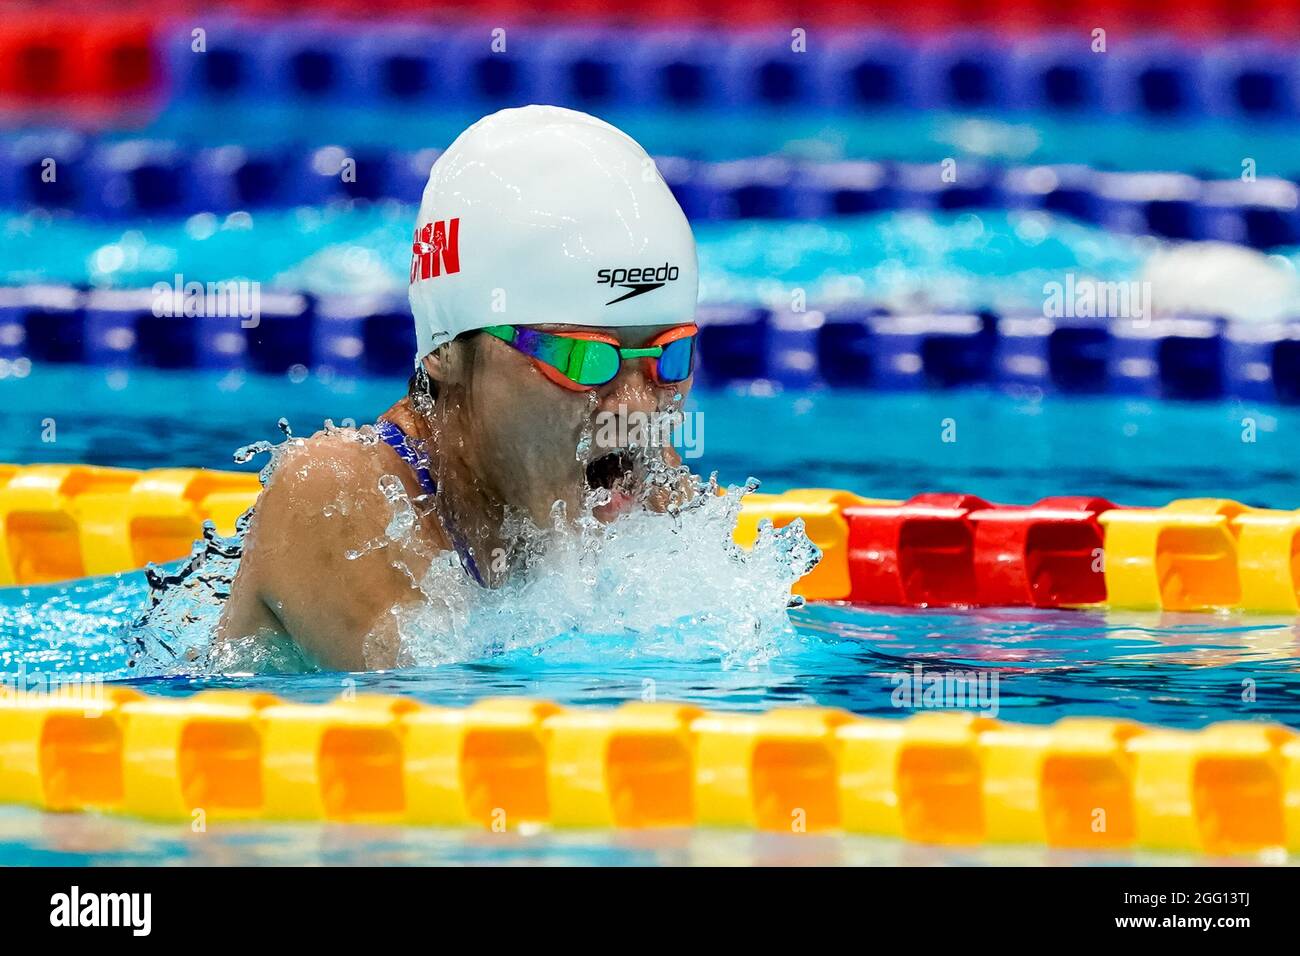 TOKYO, JAPAN - AUGUST 28: Daomin Liu of China competing in the Women's 100m Breaststroke SB6 Heats during the Tokyo 2020 Paralympic Games at Tokyo Aquatics Centre on August 28, 2021 in Tokyo, Japan (Photo by Ilse Schaffers/Orange Pictures) NOCNSF Stock Photo